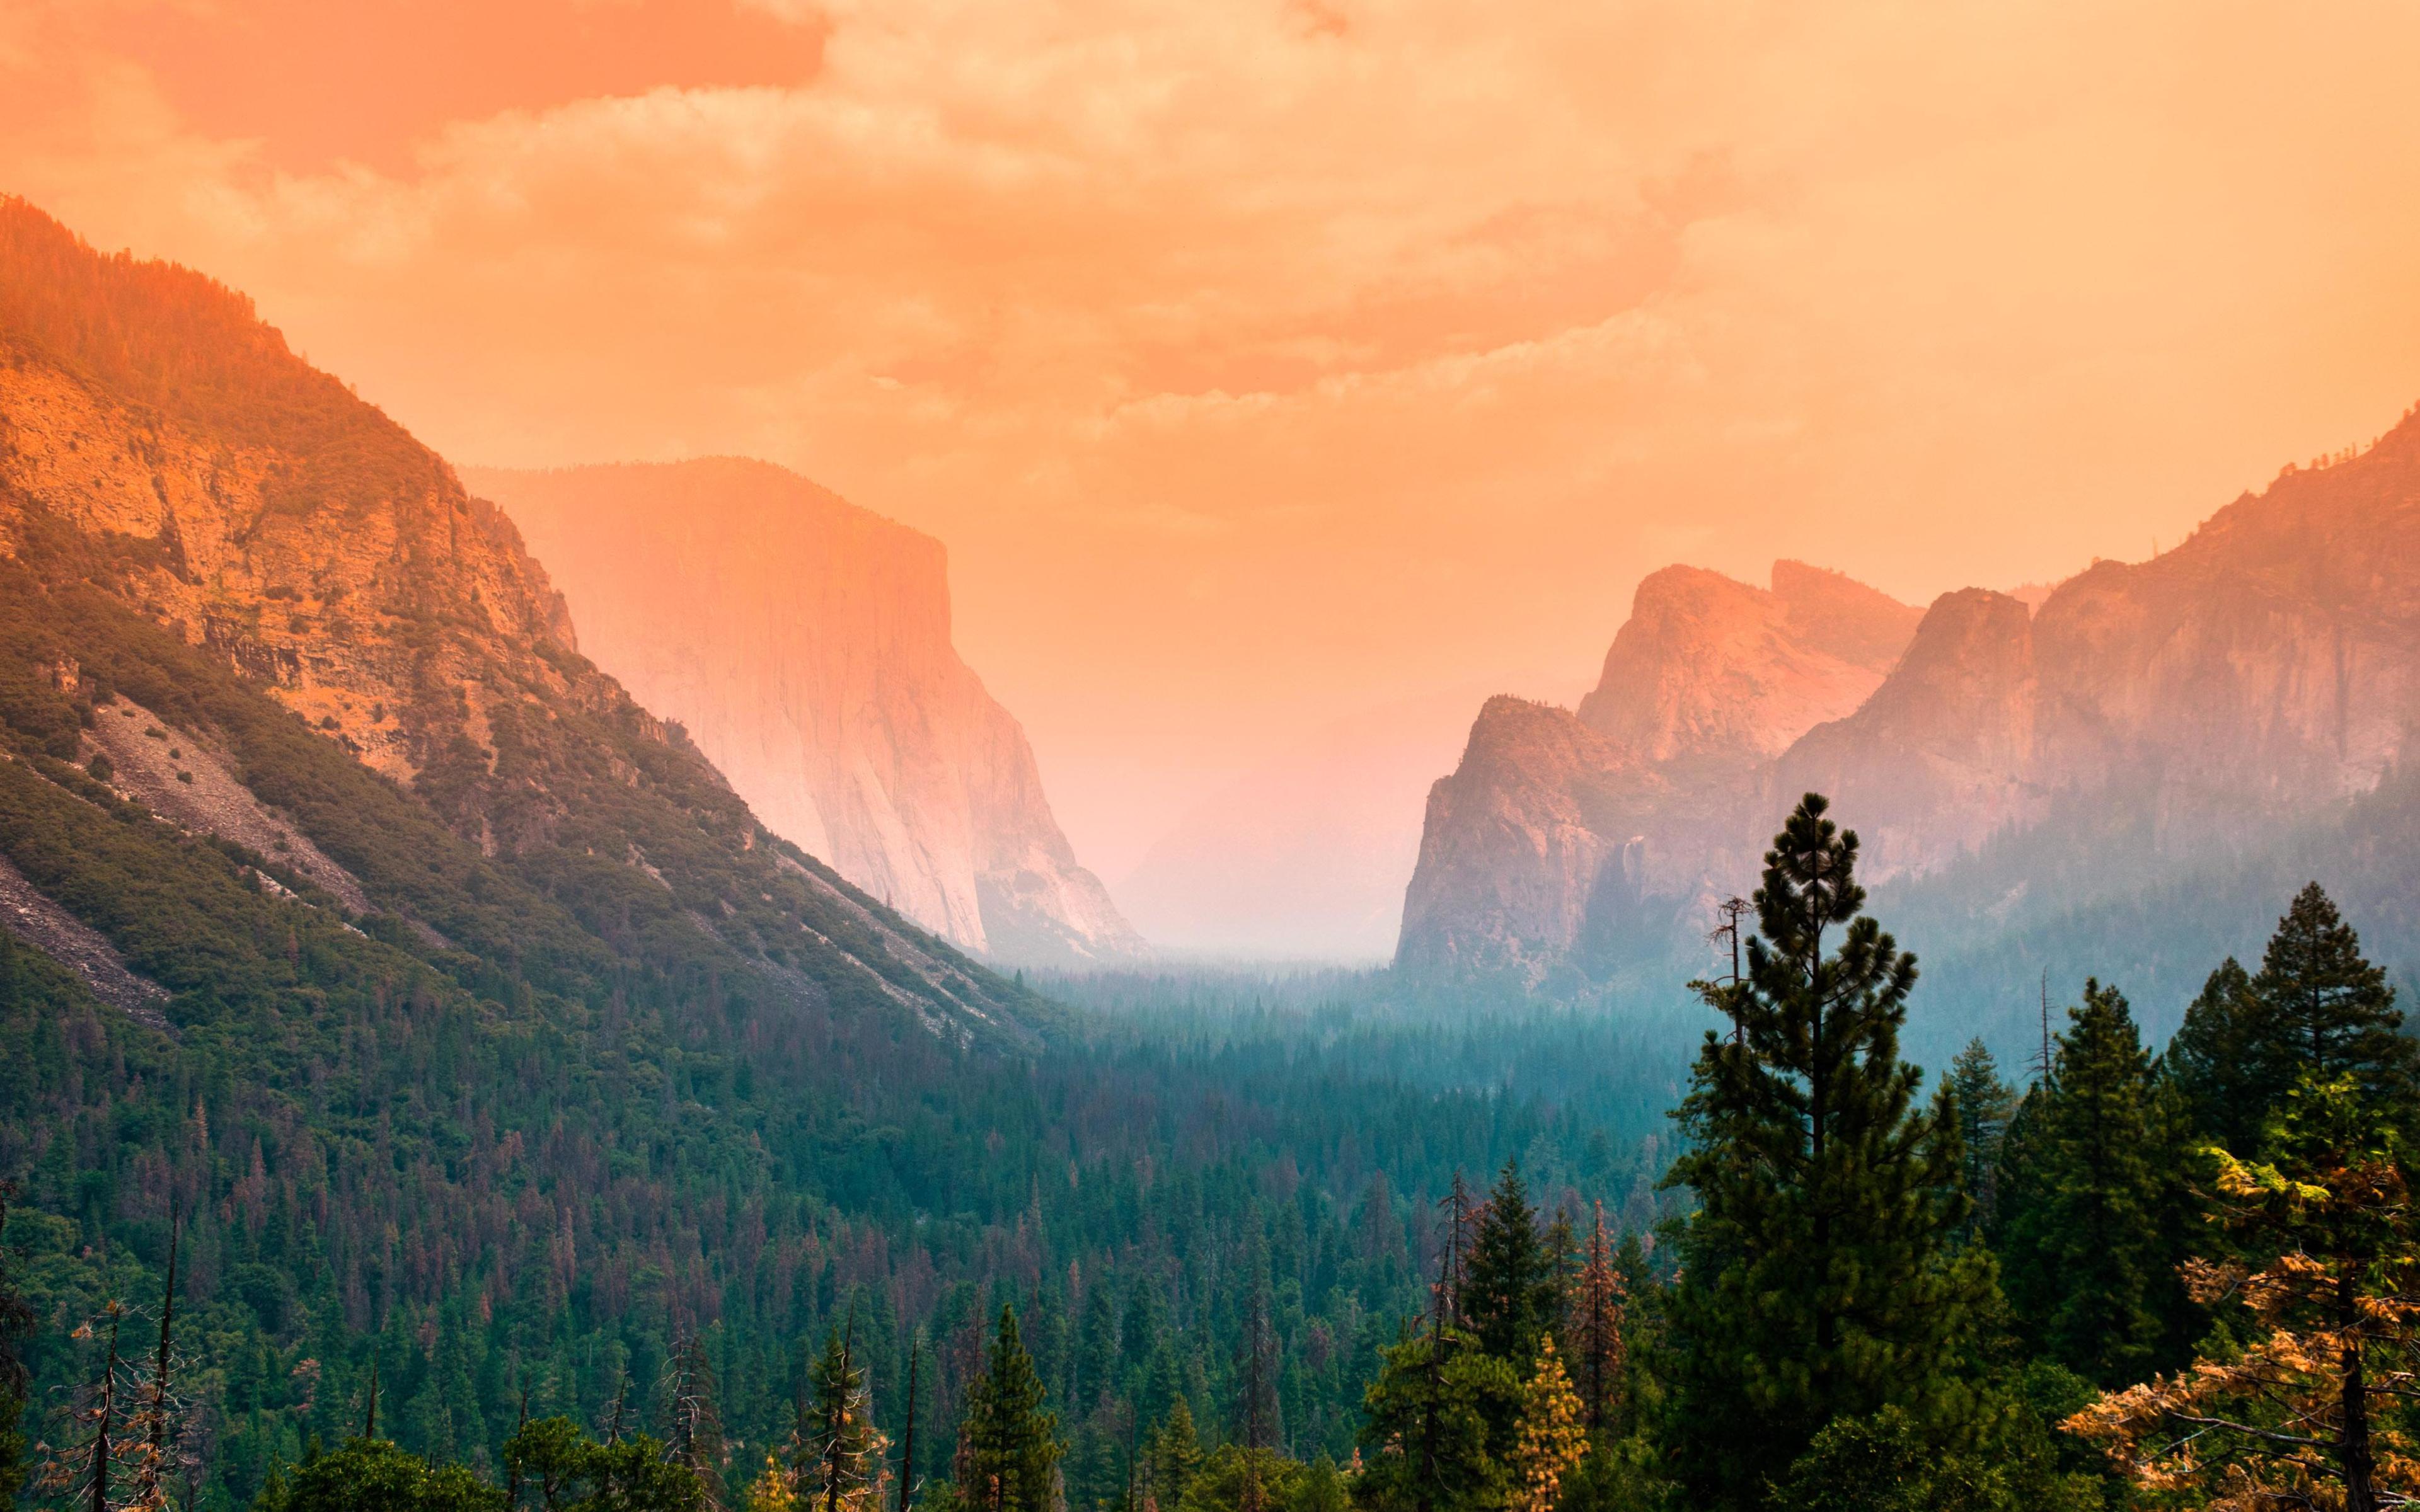 Download wallpaper 4k, Yosemite Valley, fog, autumn, american landmarks, Yosemite National Park, forest, California, USA, America for desktop with resolution 3840x2400. High Quality HD picture wallpaper